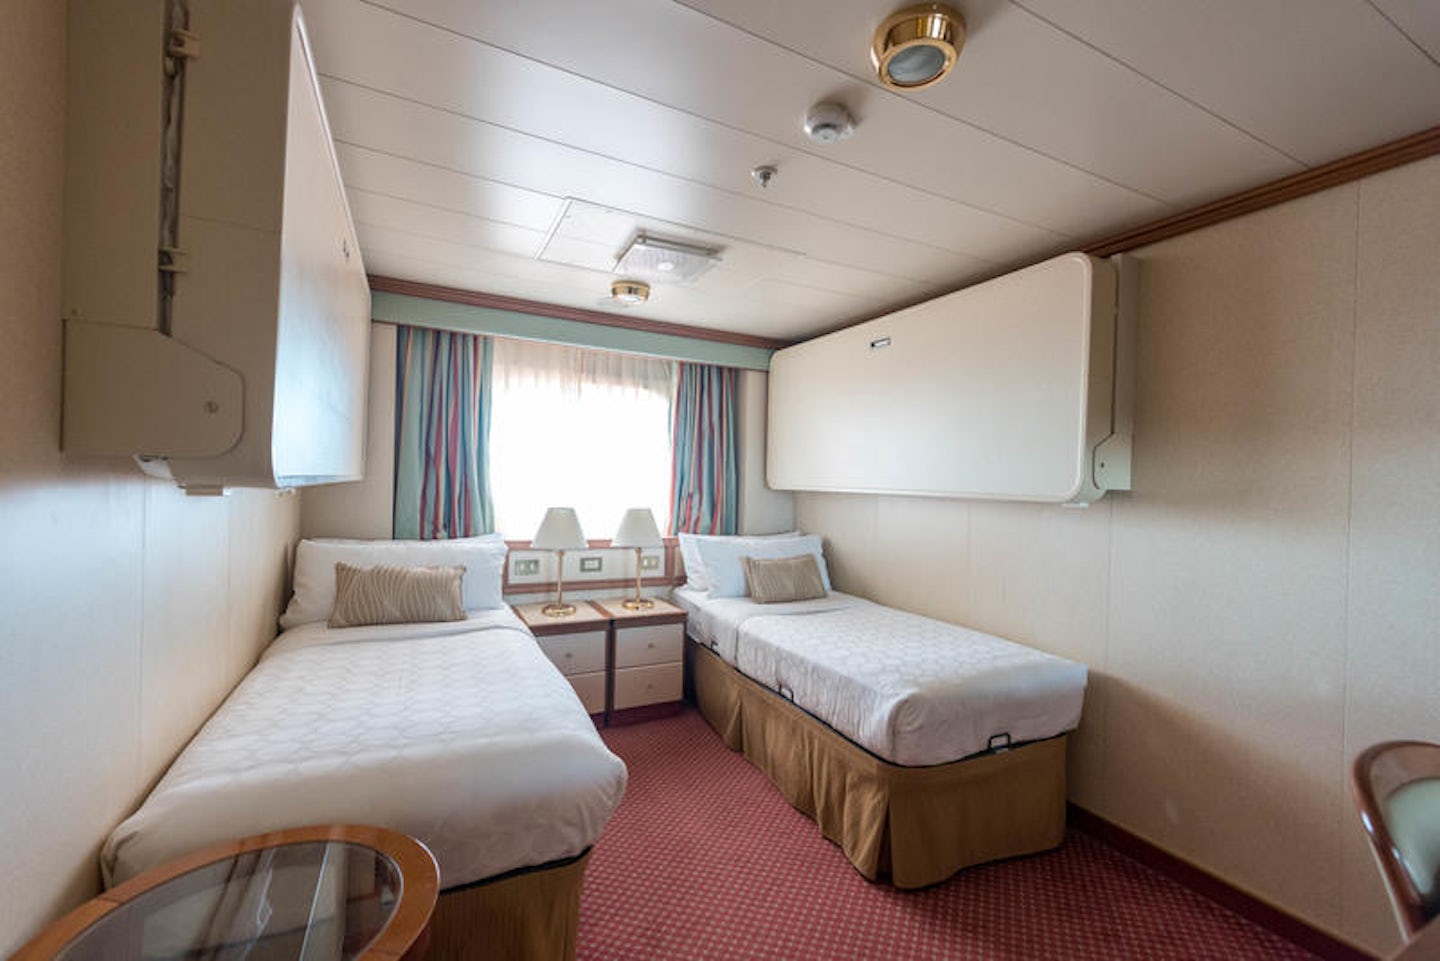 The Obstructed Ocean-View Cabin on Emerald Princess